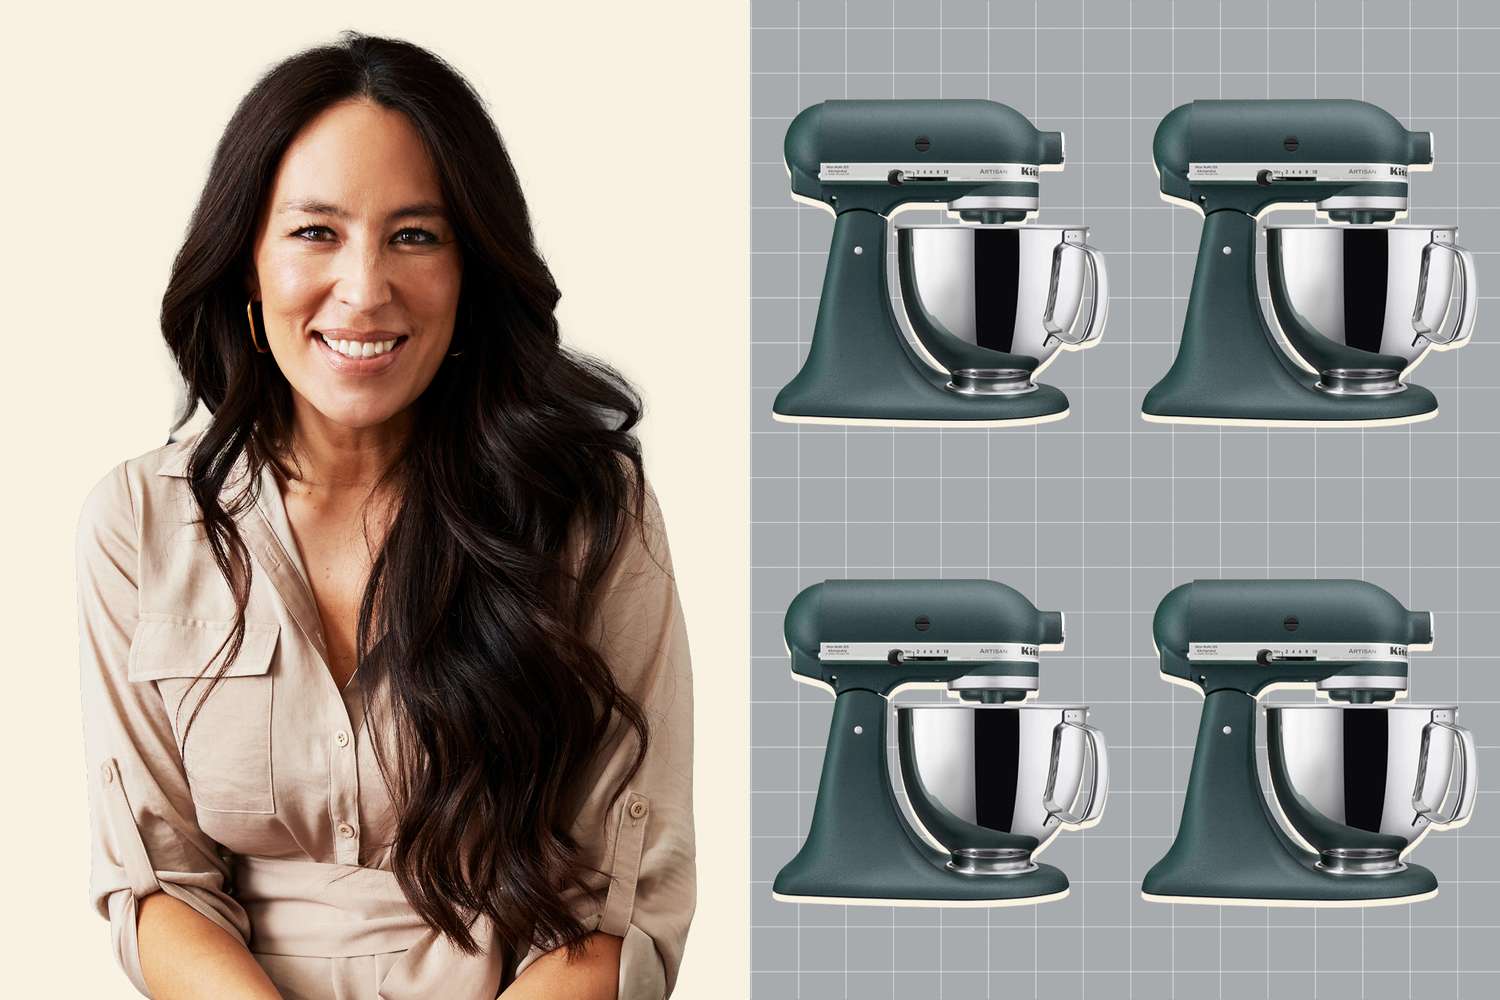 Joanna Gaines next to a grid of KitchenAid Stand mixers